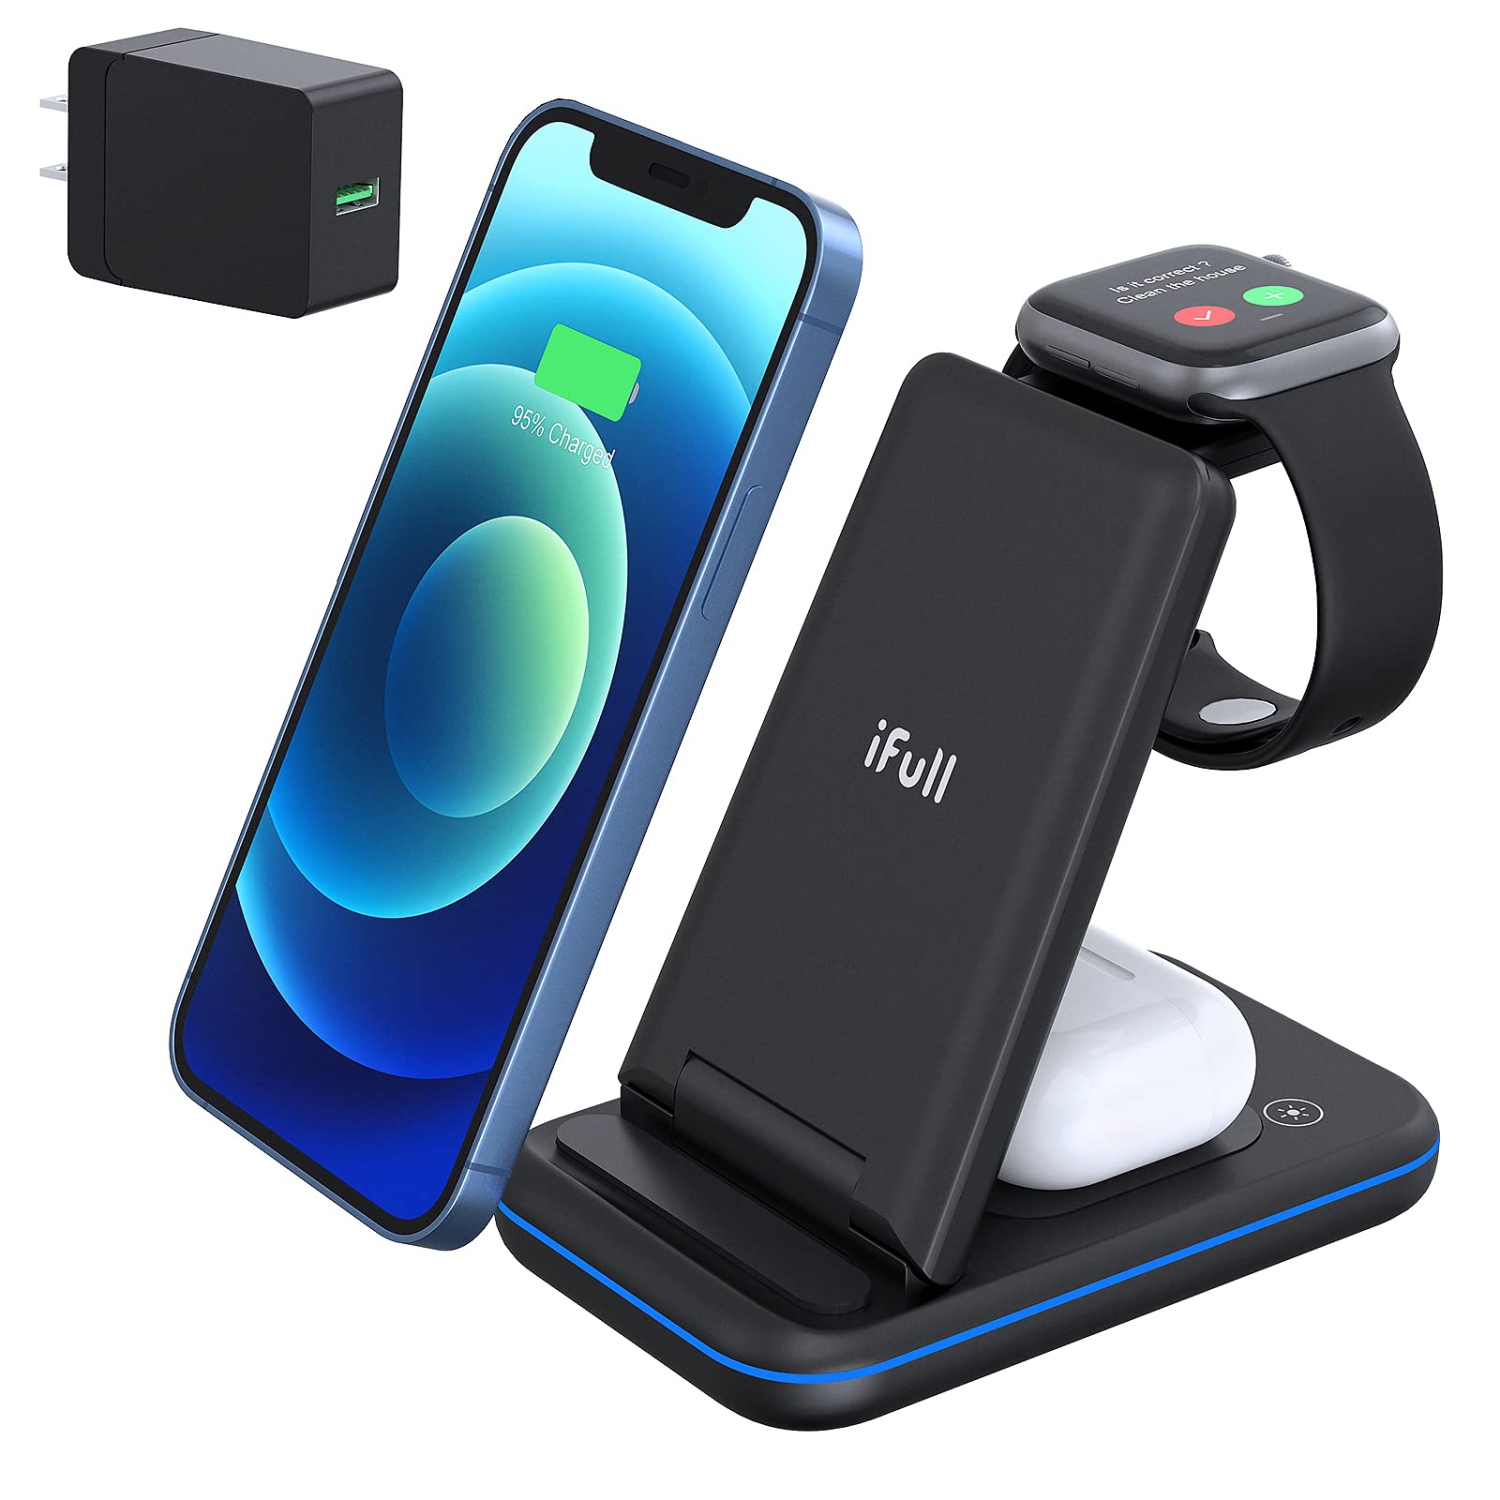 iPhone Wireless Charger Stand,QI Fast Foldable 3 in 1 Charging Station,Wireless Charging Dock for Apple iPhone 13/12/11/11pr